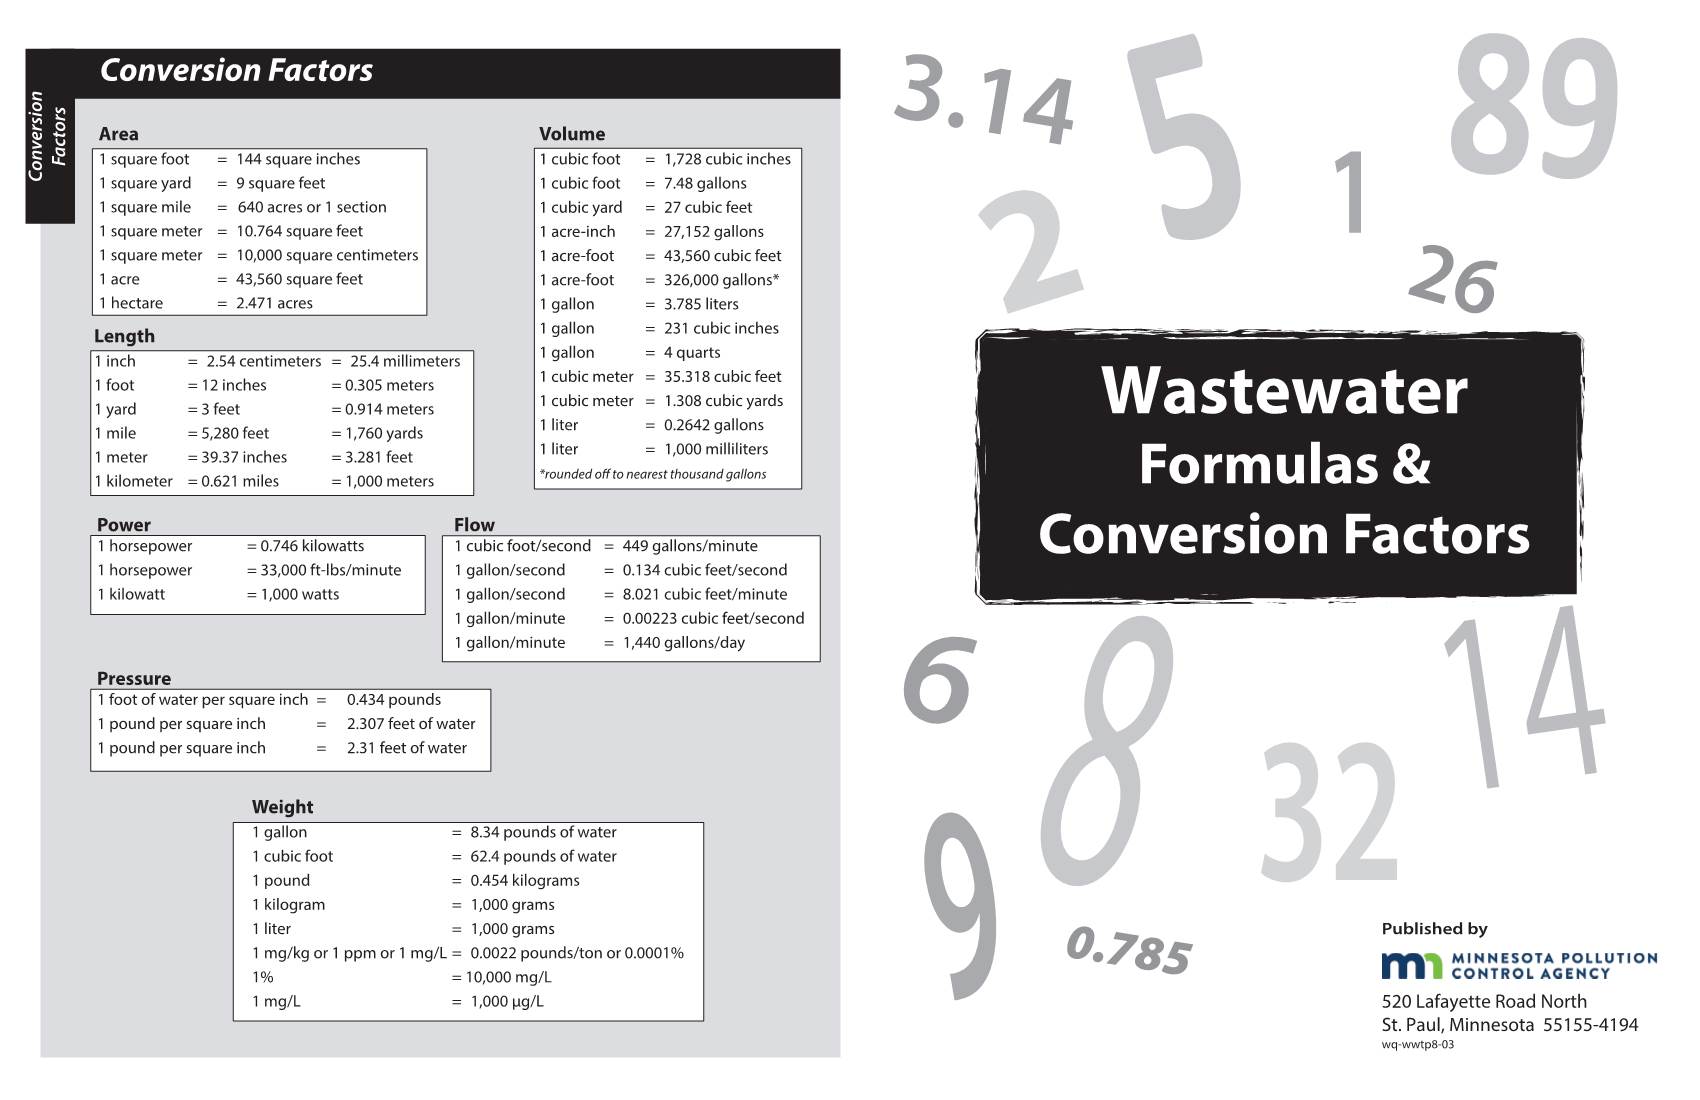 Wastewater Formulas and Conversion Factors (Wq-Wwtp8-03)